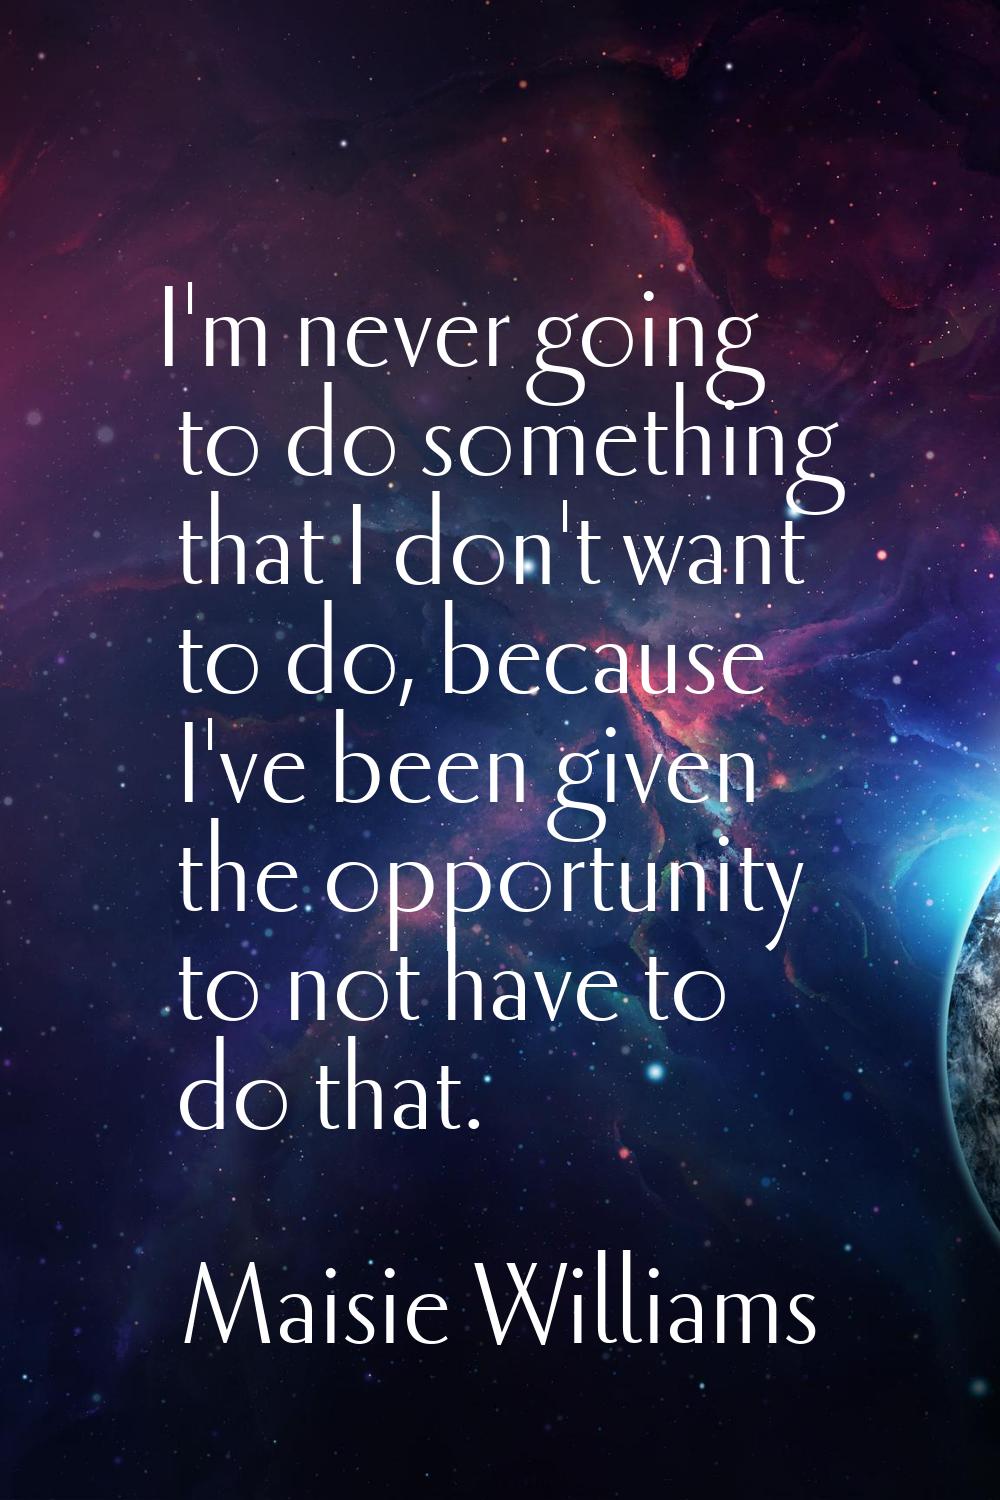 I'm never going to do something that I don't want to do, because I've been given the opportunity to